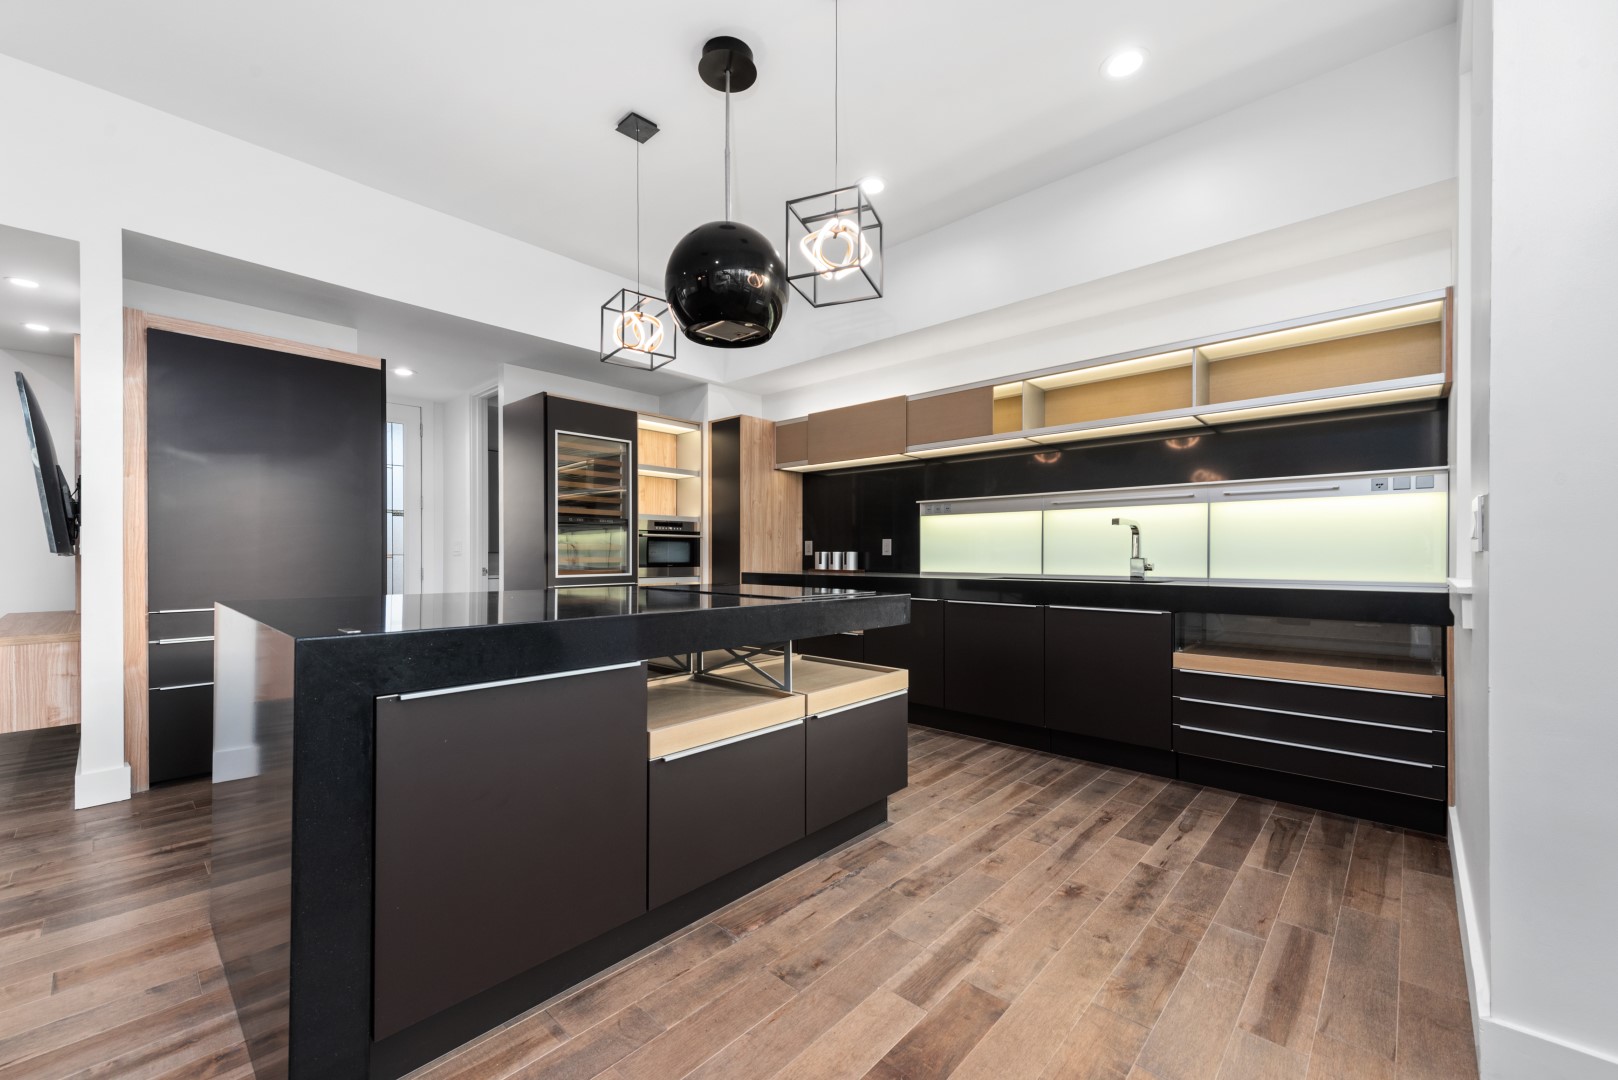 Exquisite Luxury Kitchen Design with Modern Appliances and High-End Finishes